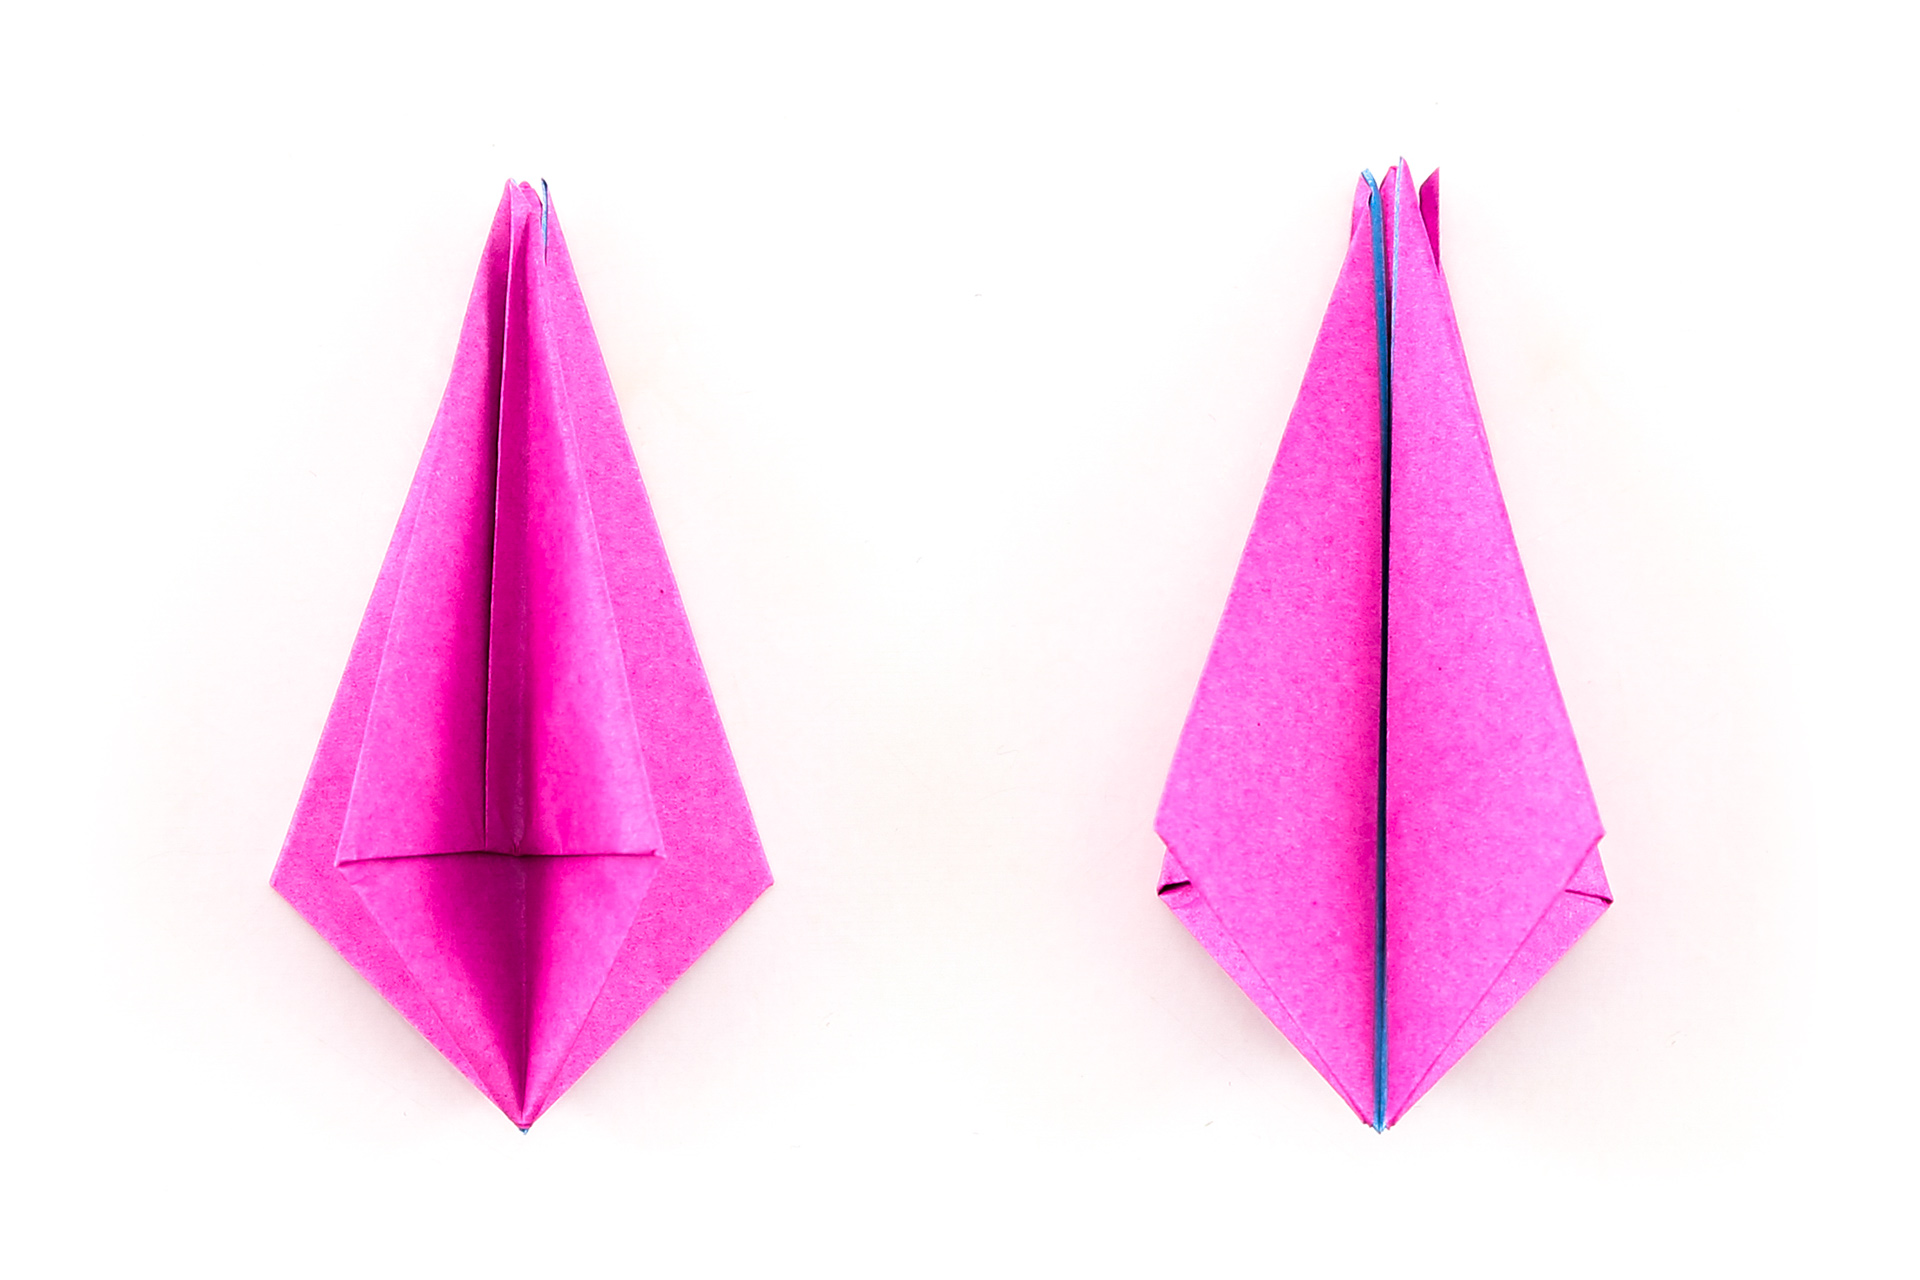 Pick up the model and fold the flaps together until you have a three dimensional diamond shape.